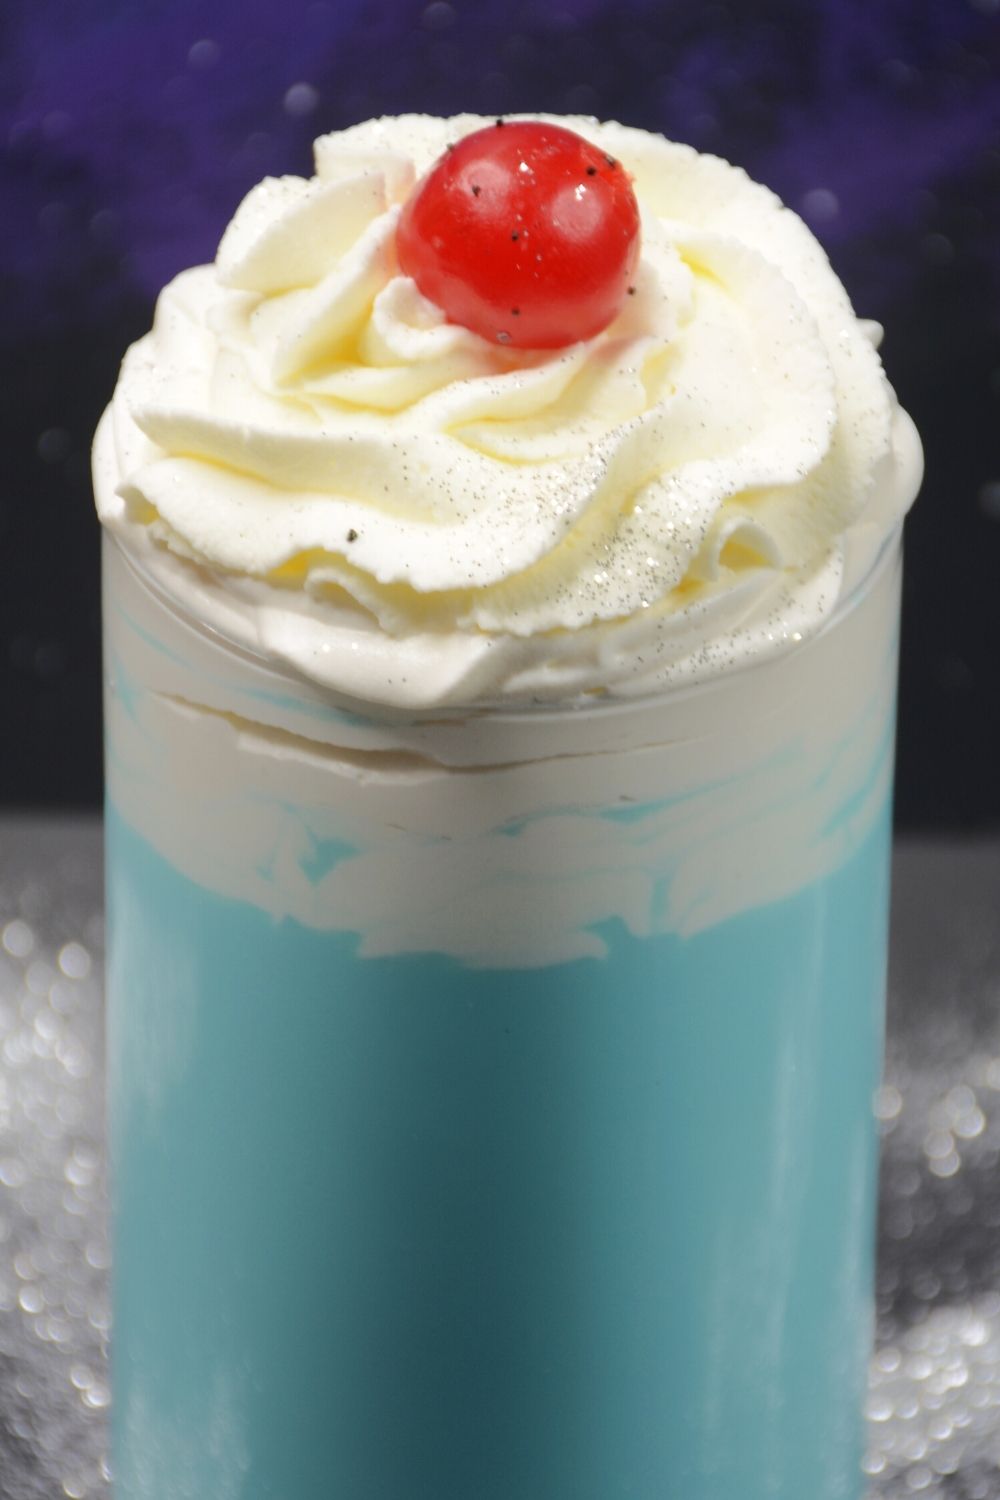 Frosty Star Wars blue milk topped with whipped cream, sugar, and a cherry